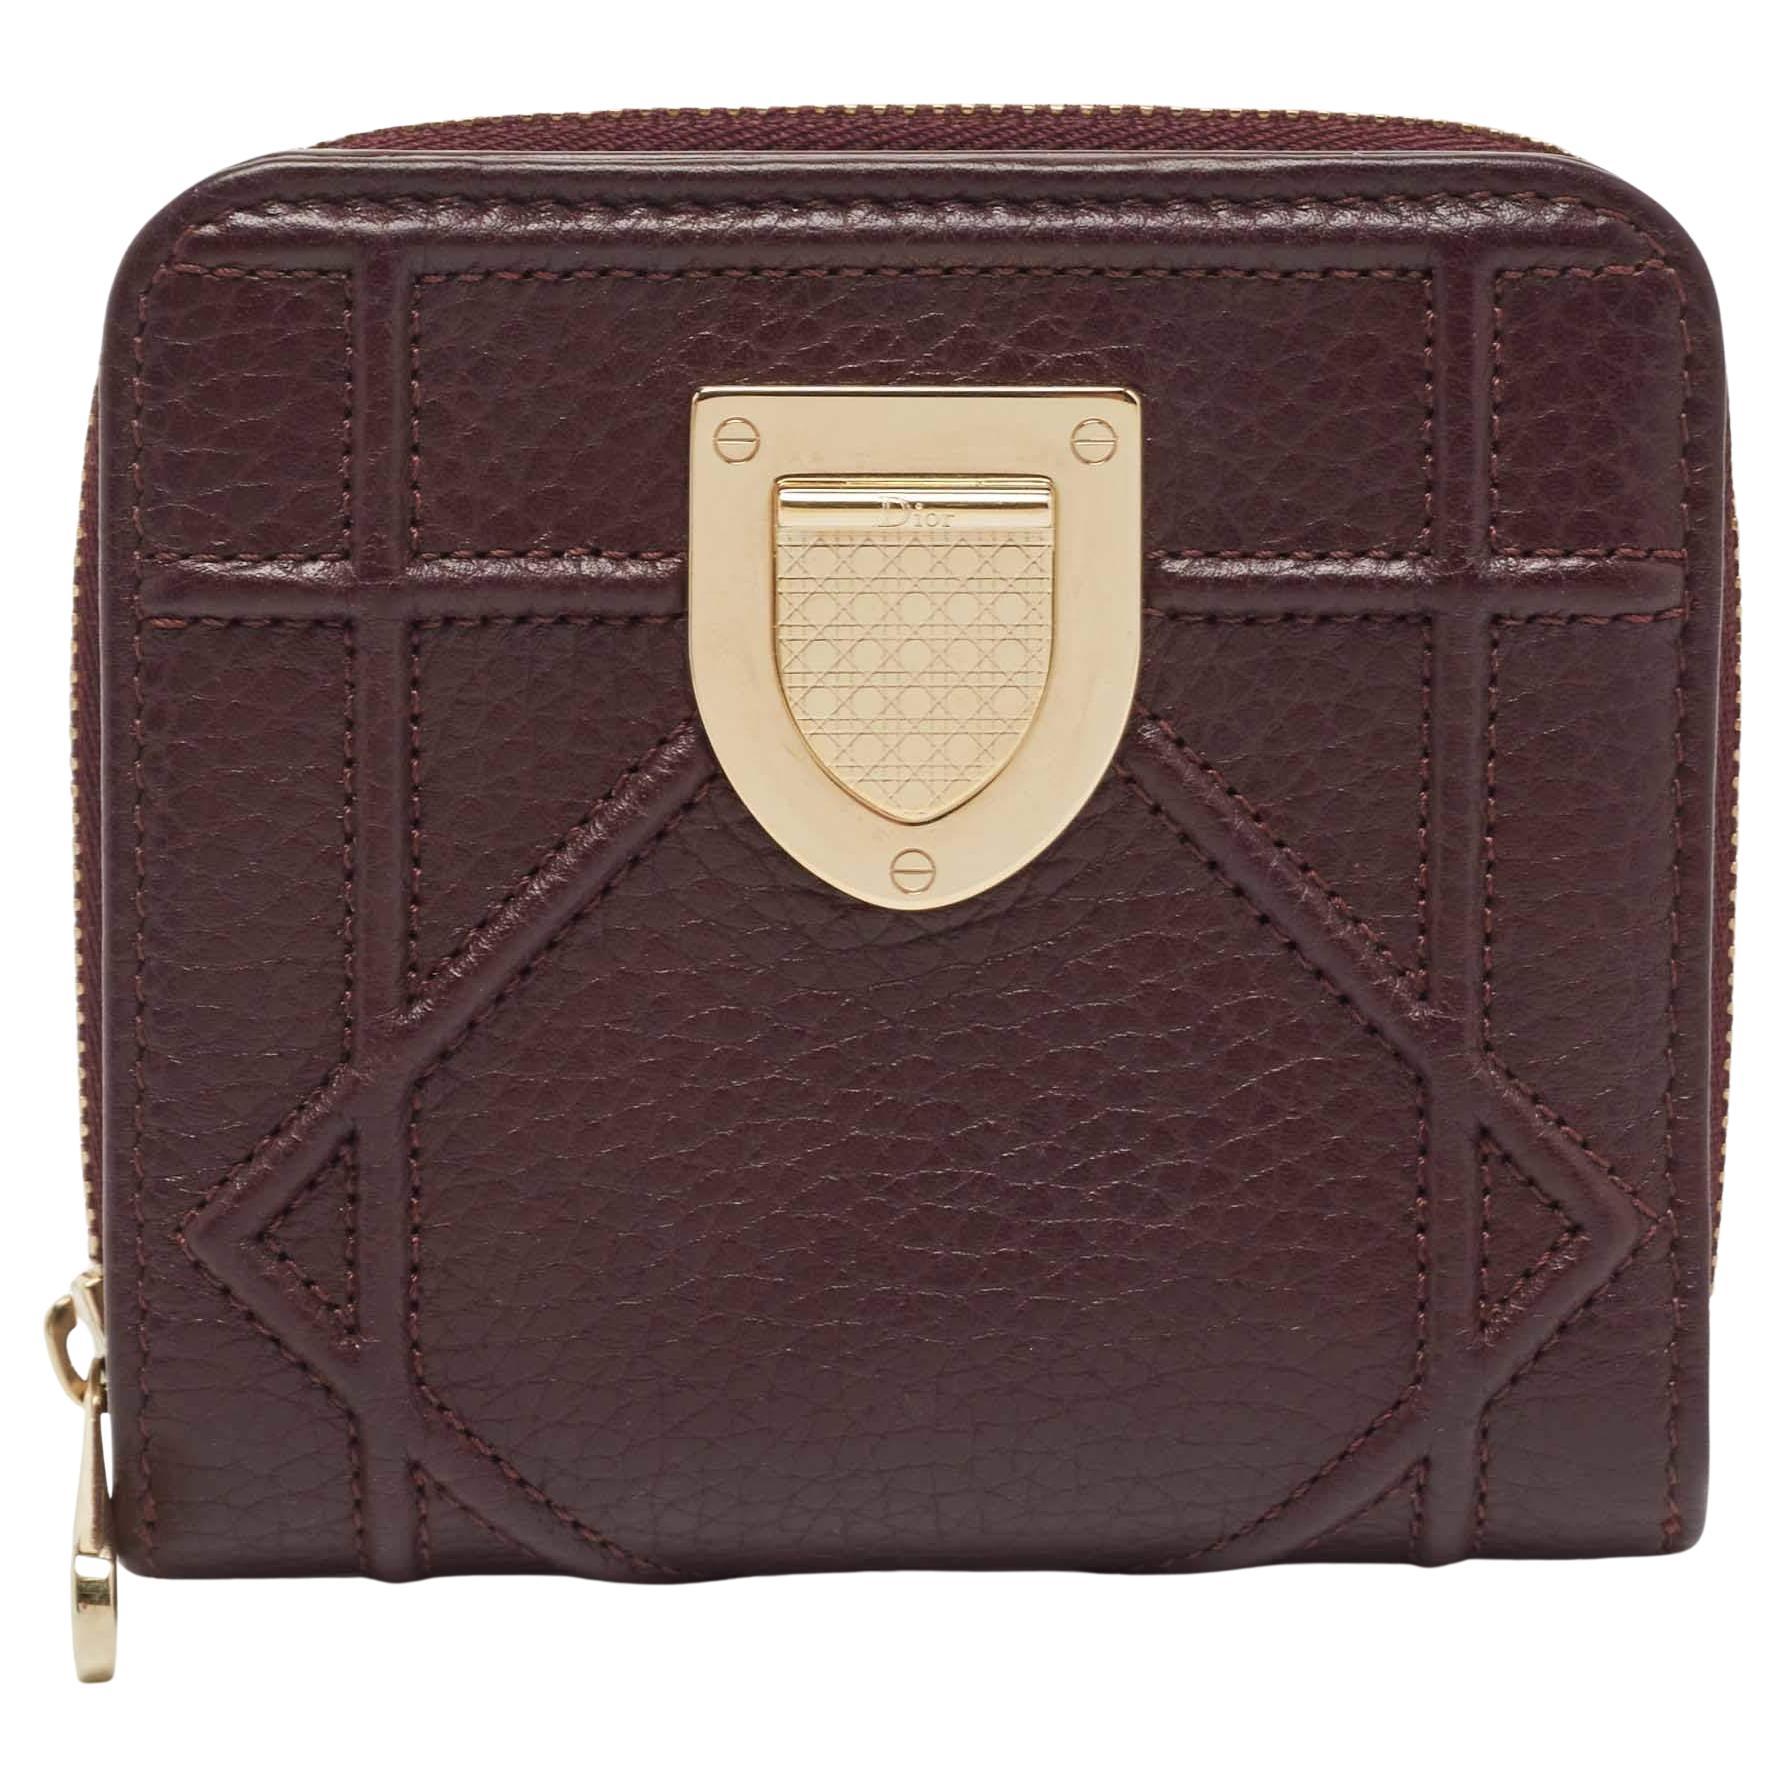 Dior Burgundy Leather Diorama Zip Compact Wallet For Sale